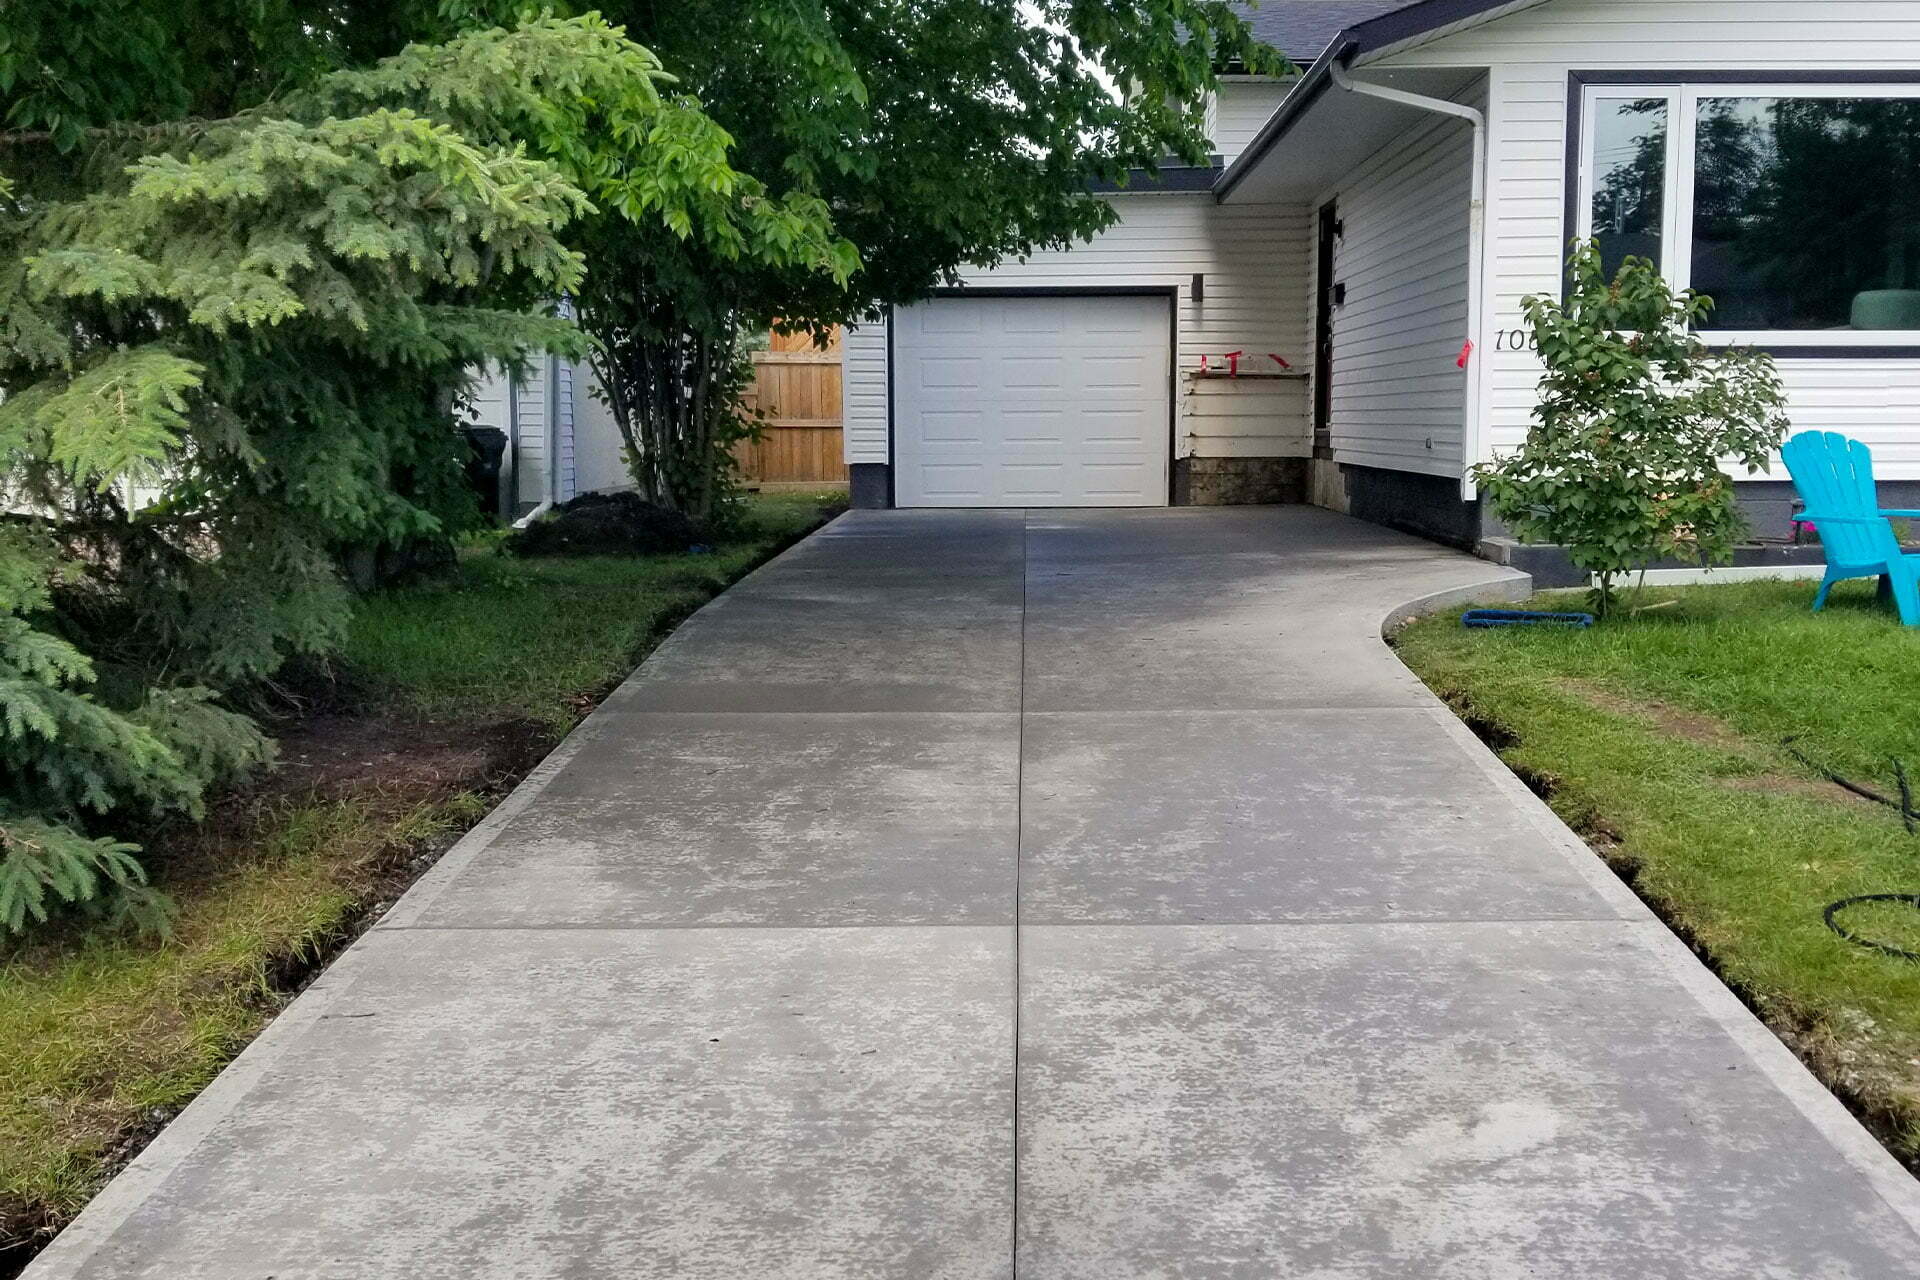 Replace-it Concrete work done